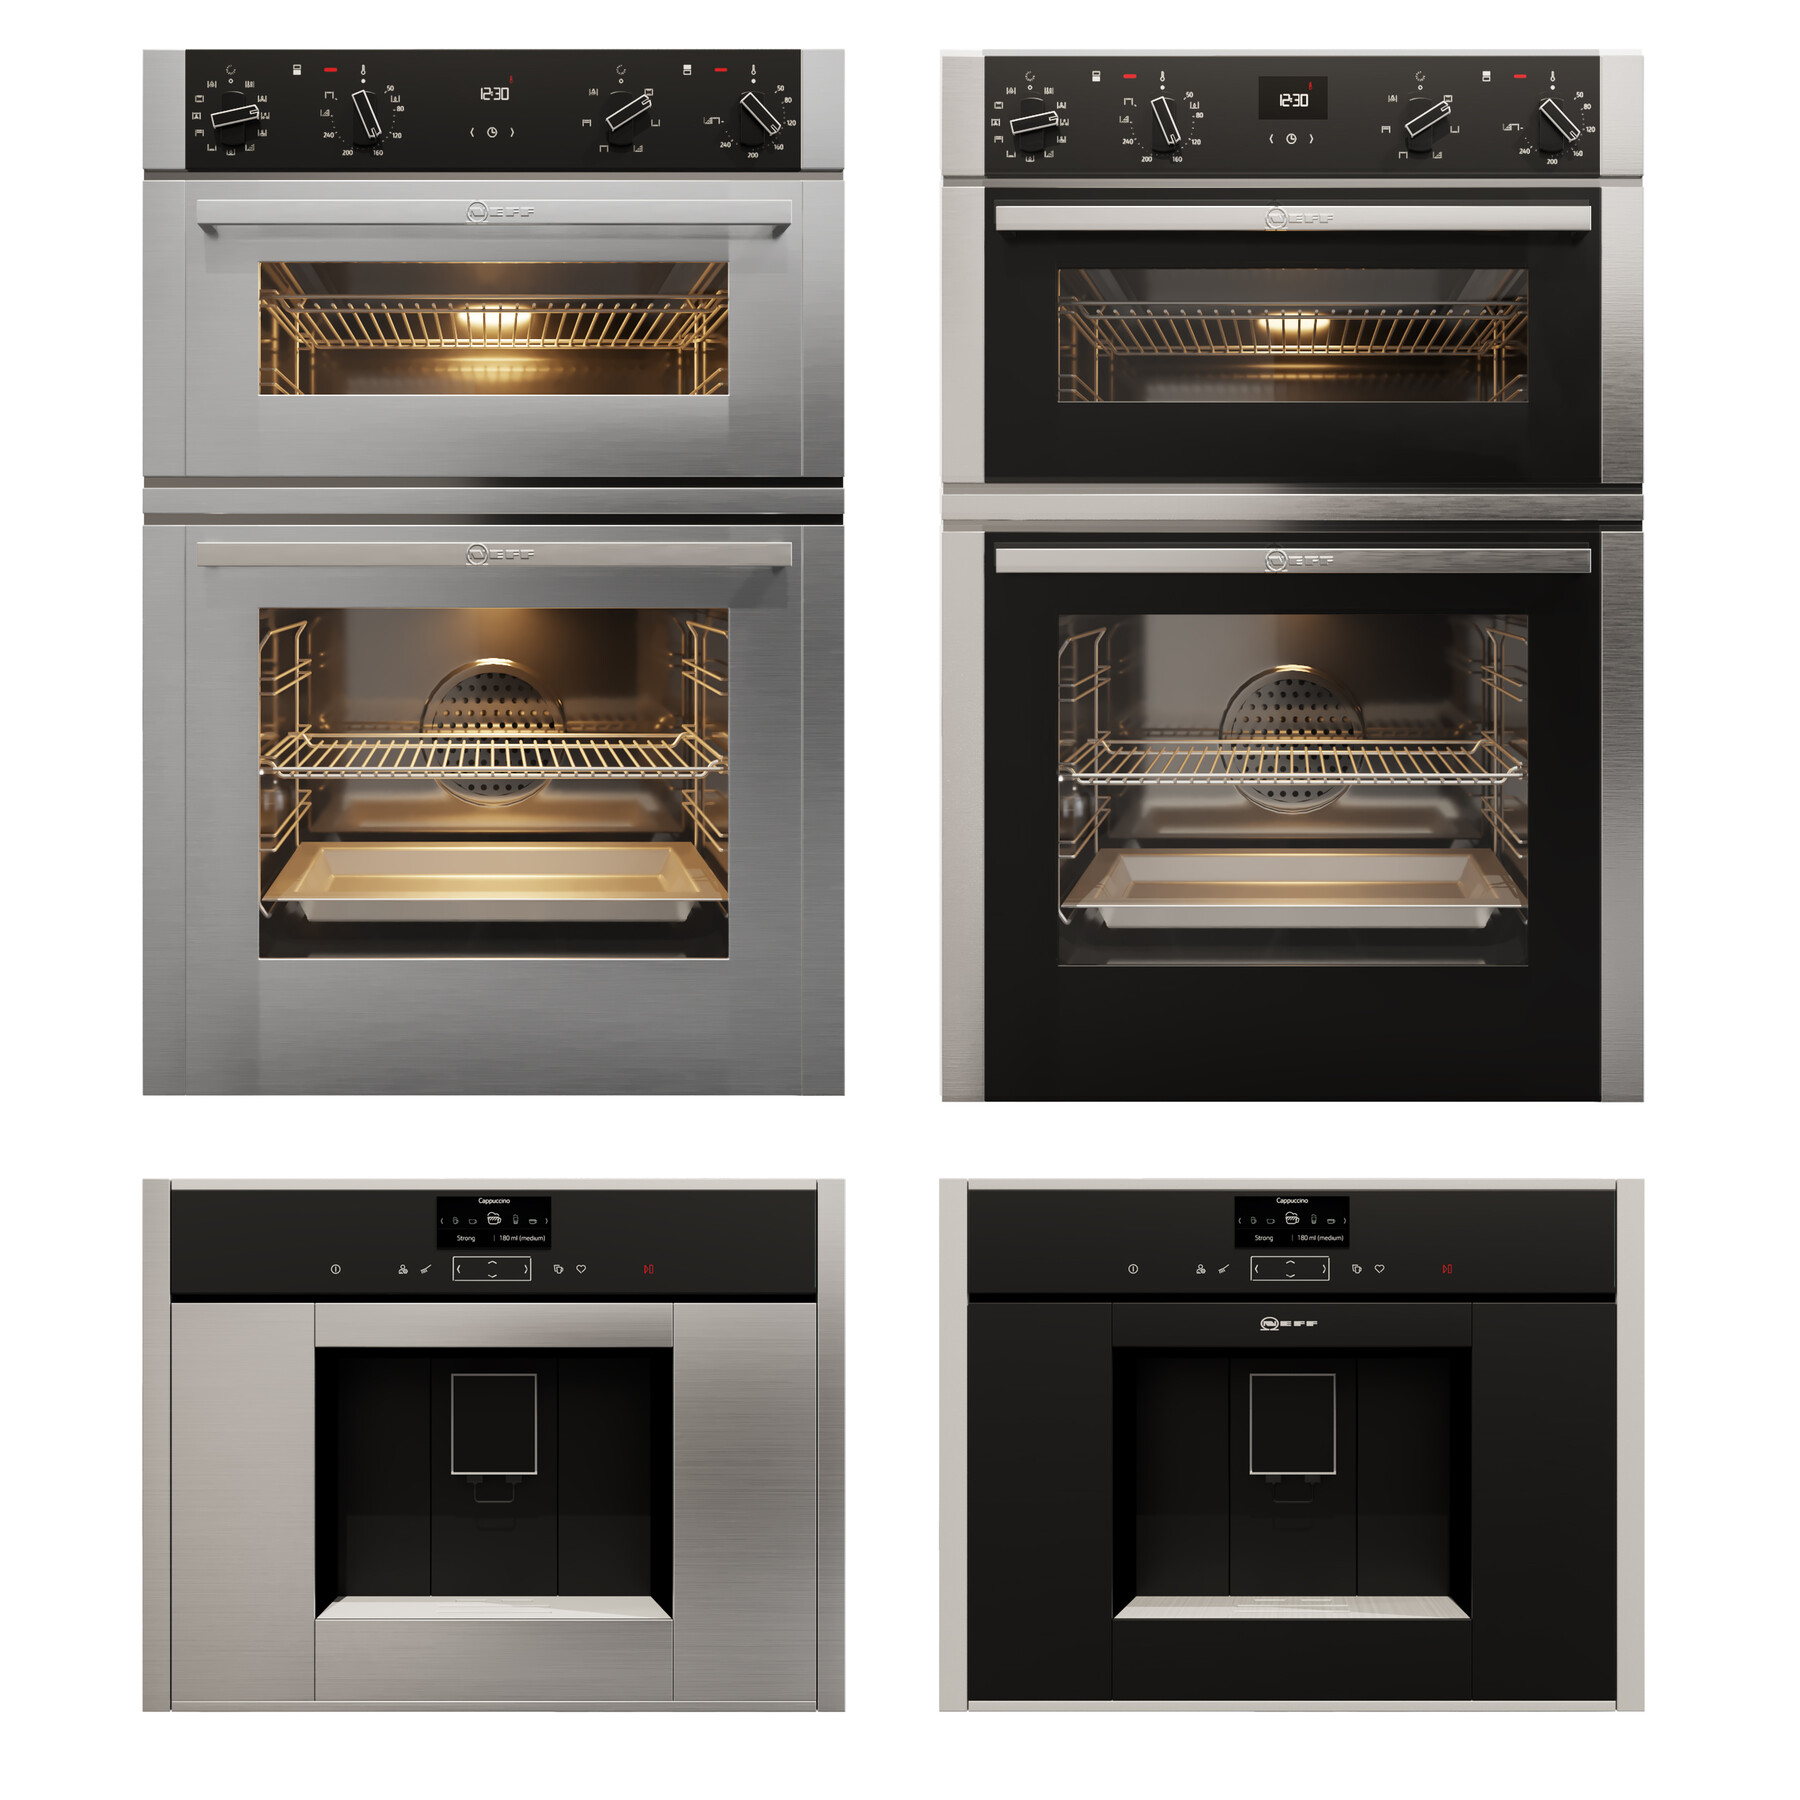 Bosch collection. Bosch Appliance collection. Neff c17wr00g0 Vertical combination with Oven. Neff c17wr00g0 in combination with Oven. Бош и Нефф.